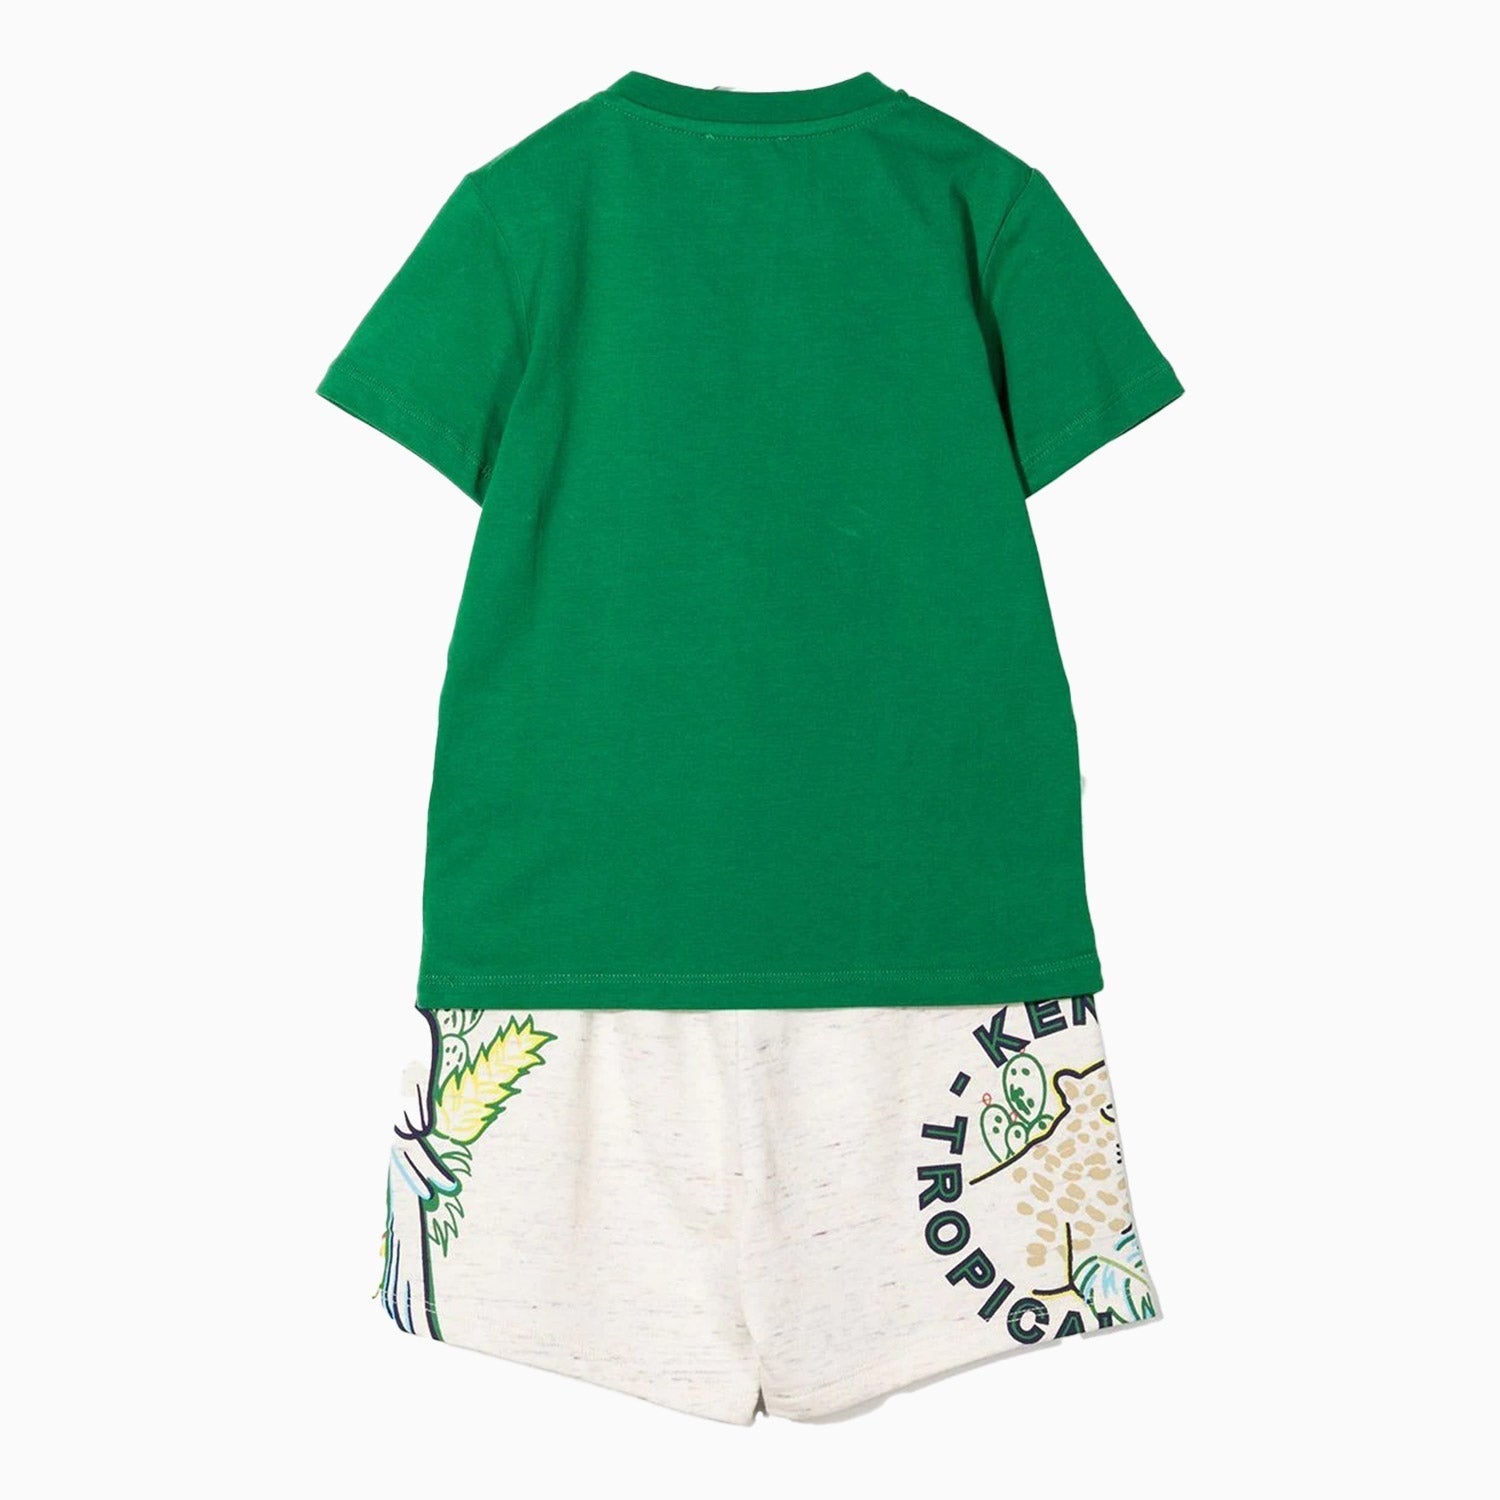 kenzo-kids-tropical-jungle-outfit-toddlers-k08041-719